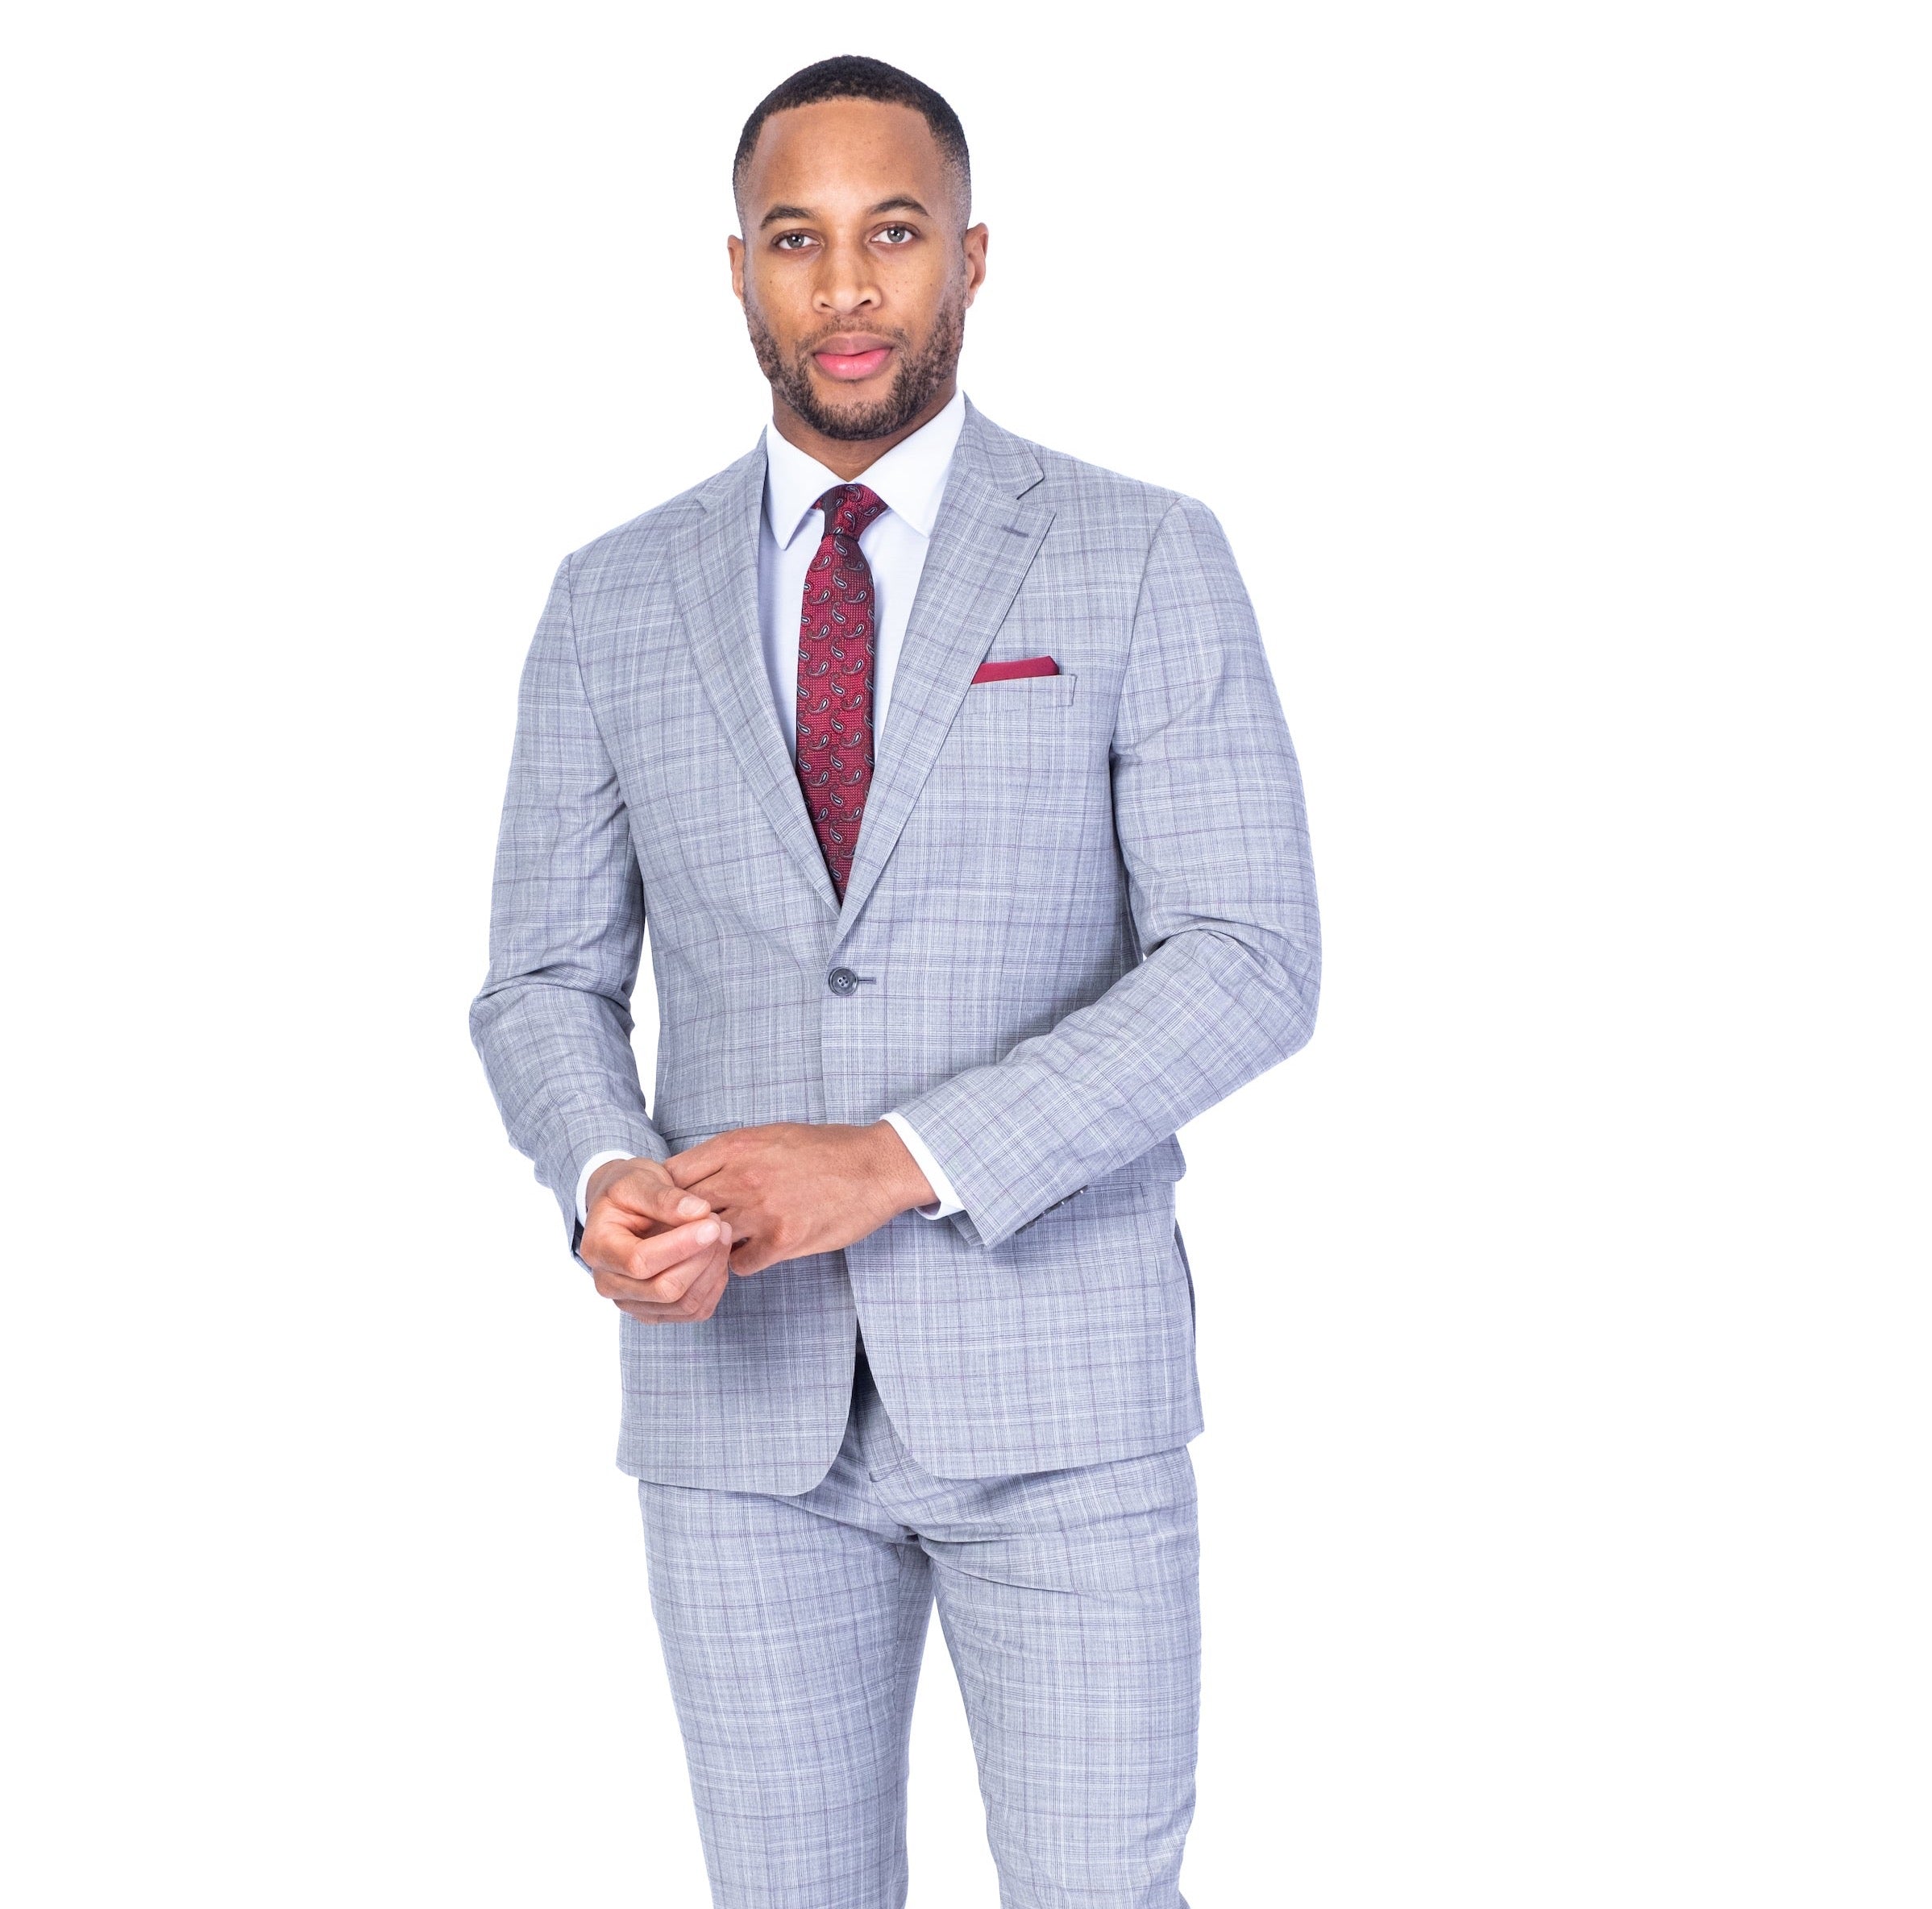 X-Slim Check Suit - Silver with Burgundy